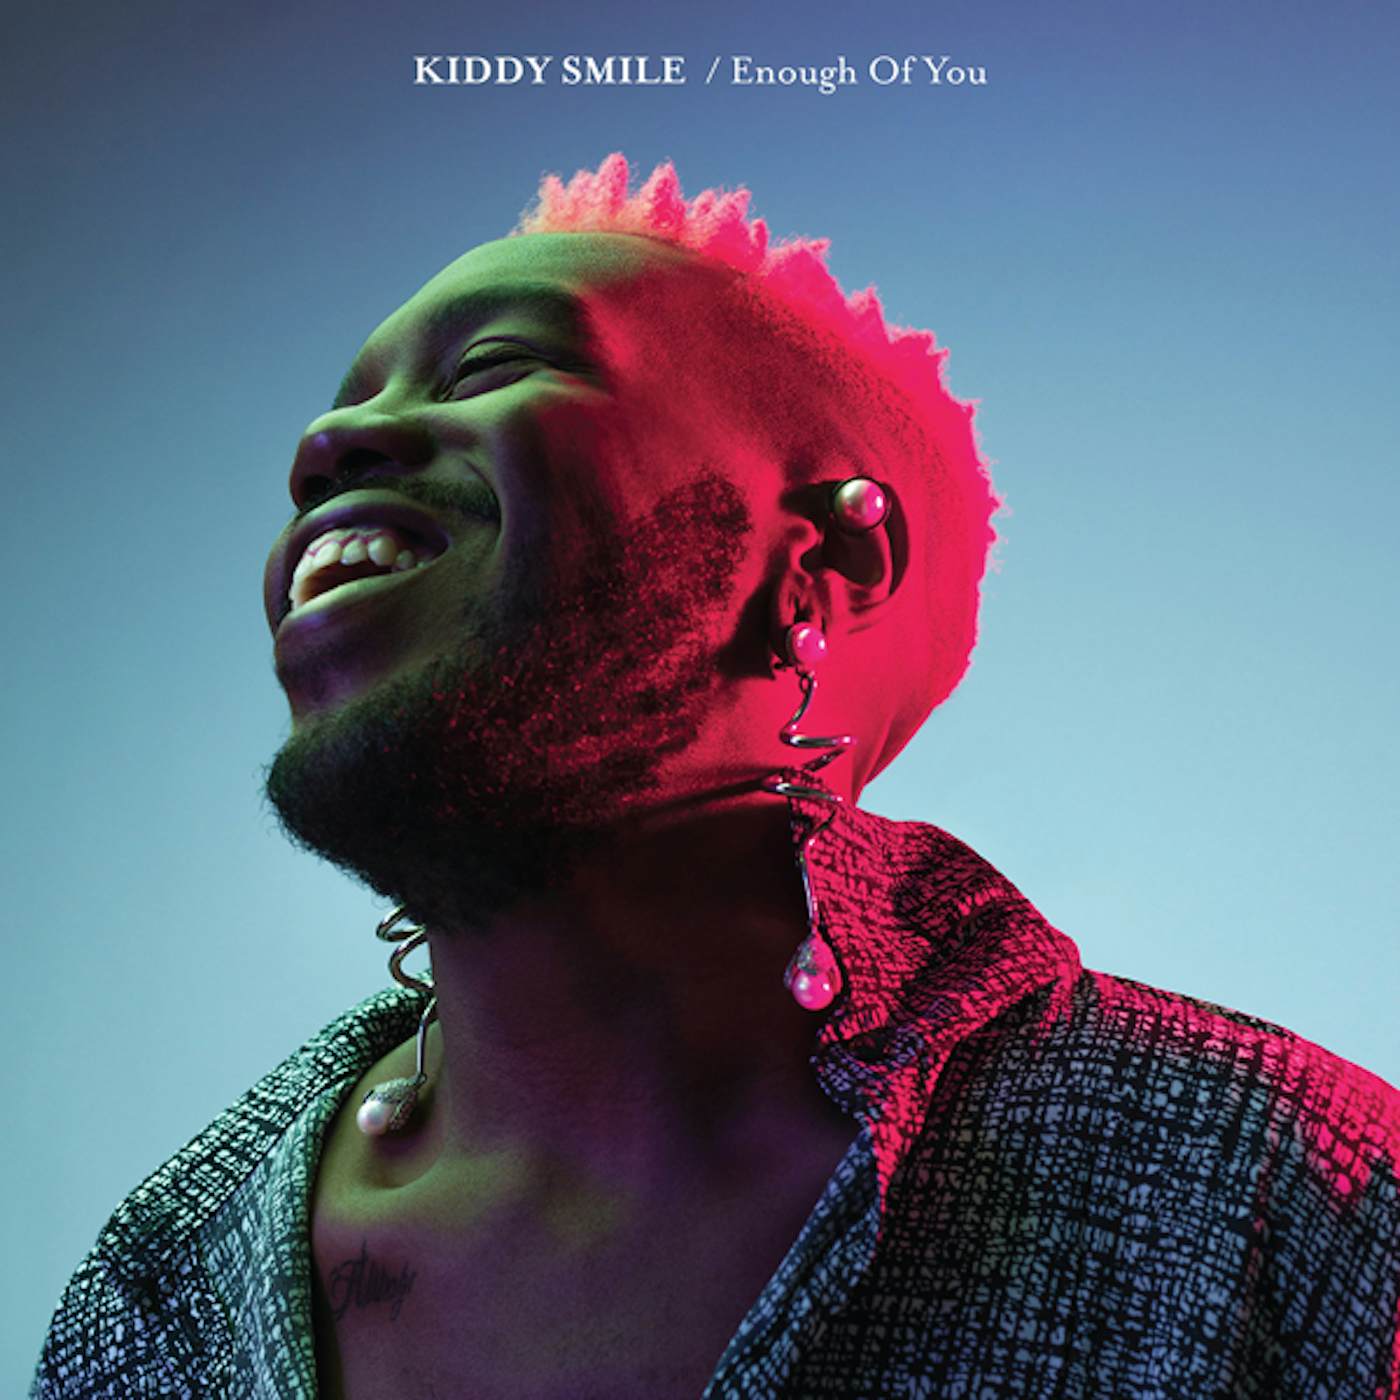 Kiddy Smile ENOUGH OF YOU Vinyl Record